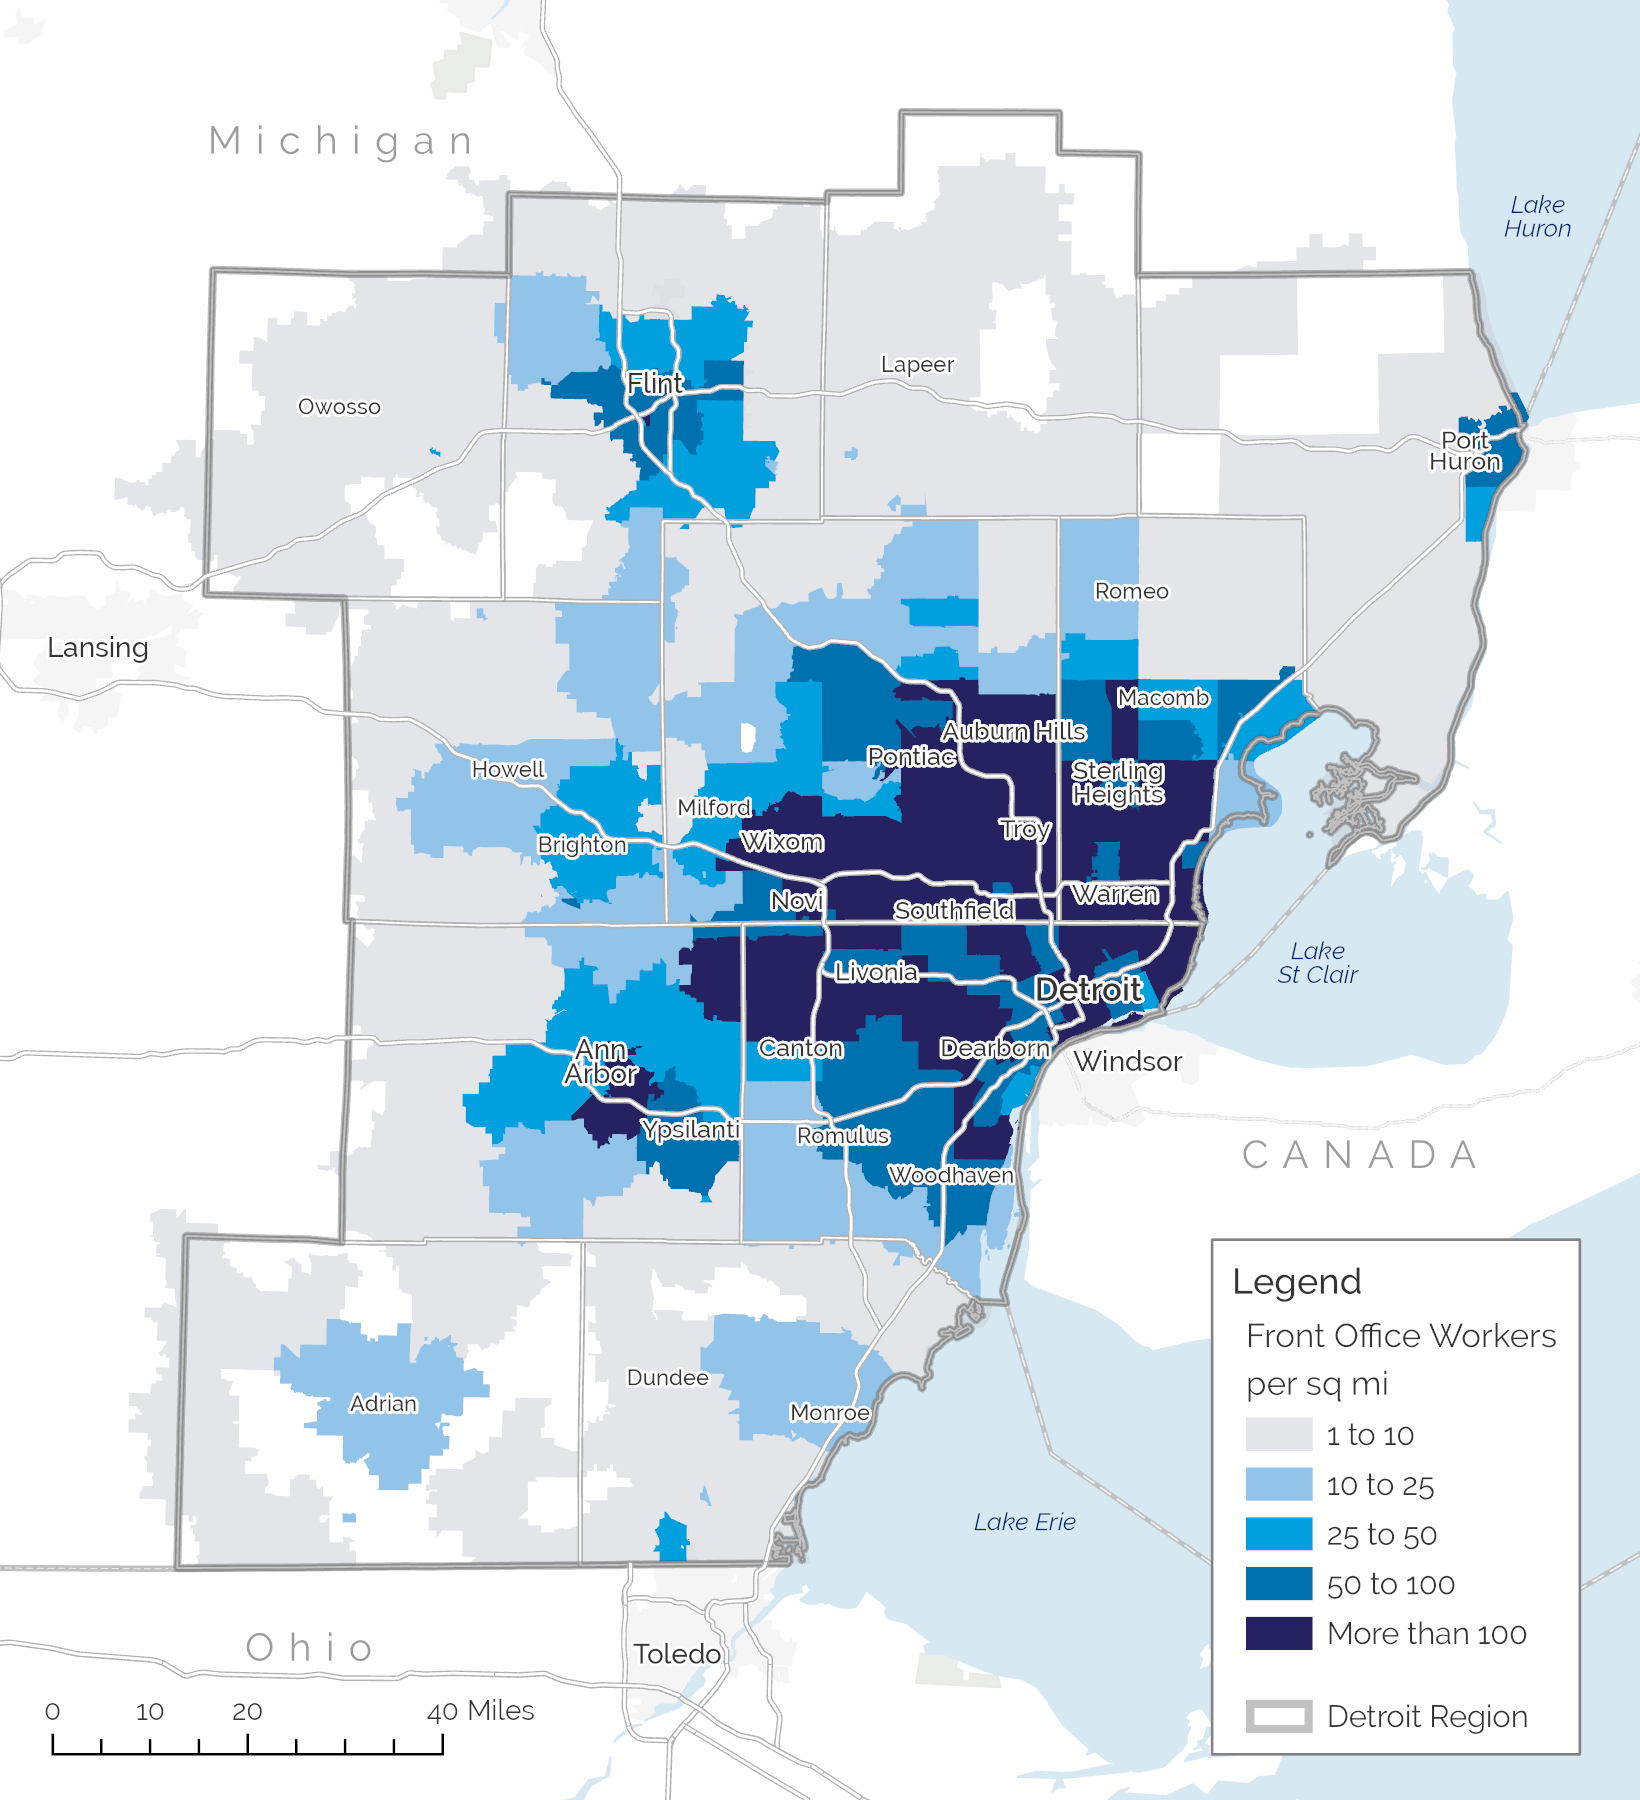 Map representing the density of front office workers in the Detroit Region